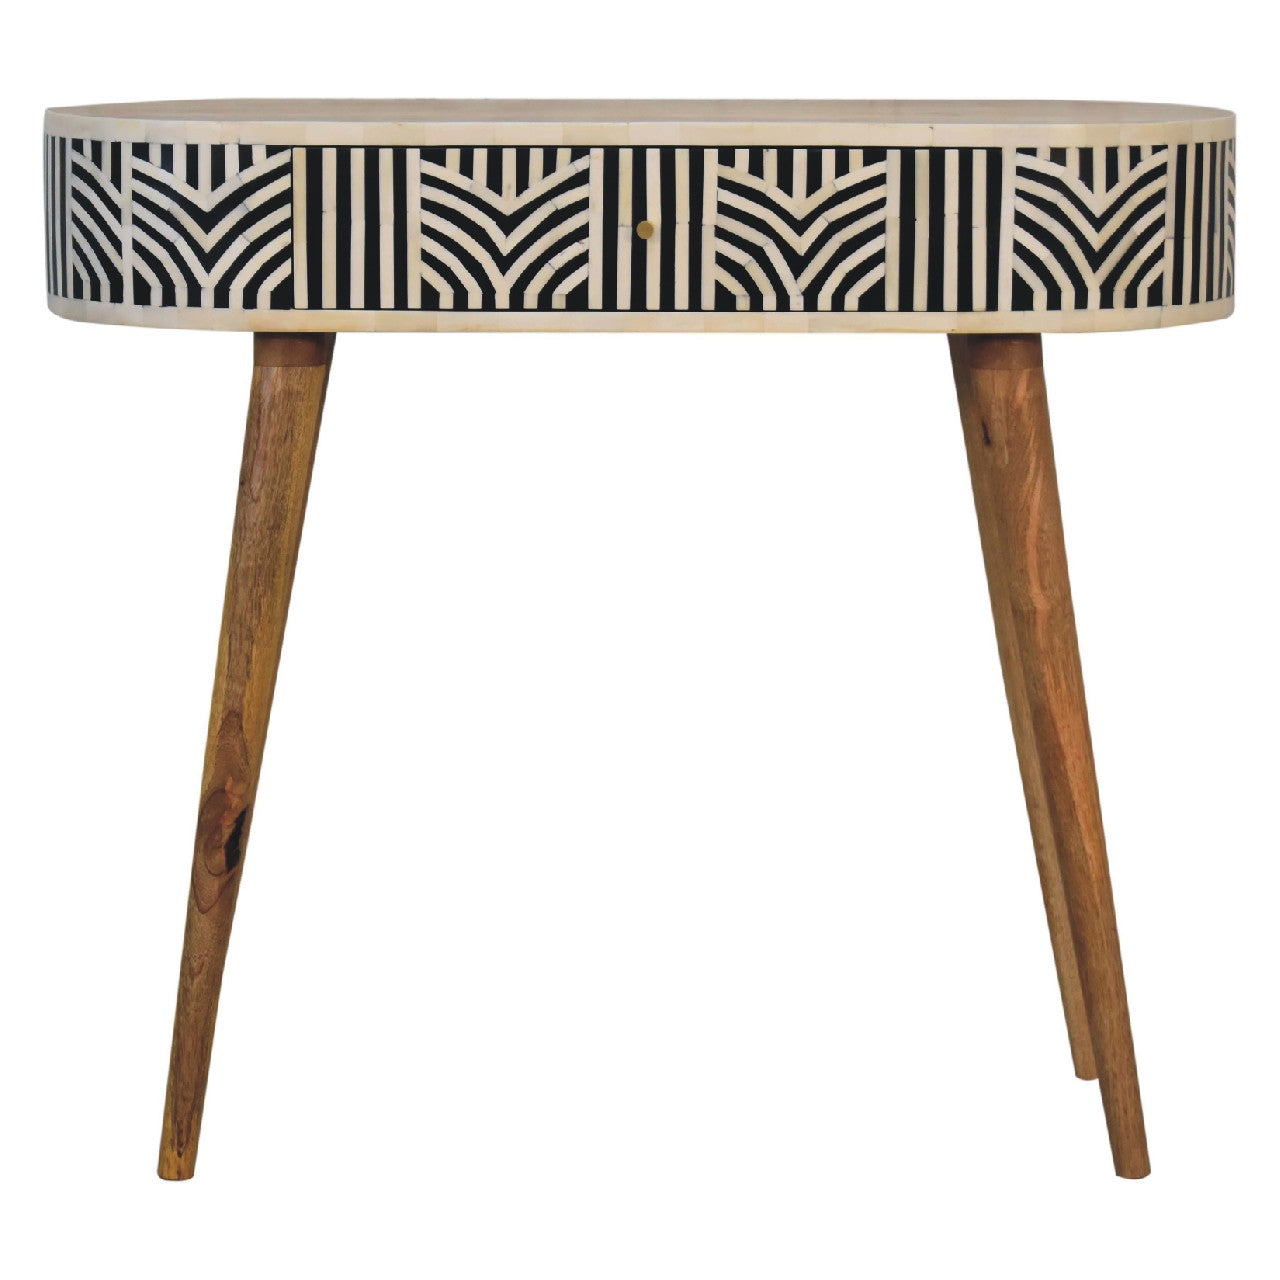 View Edessa Bone Inlay Console Table information